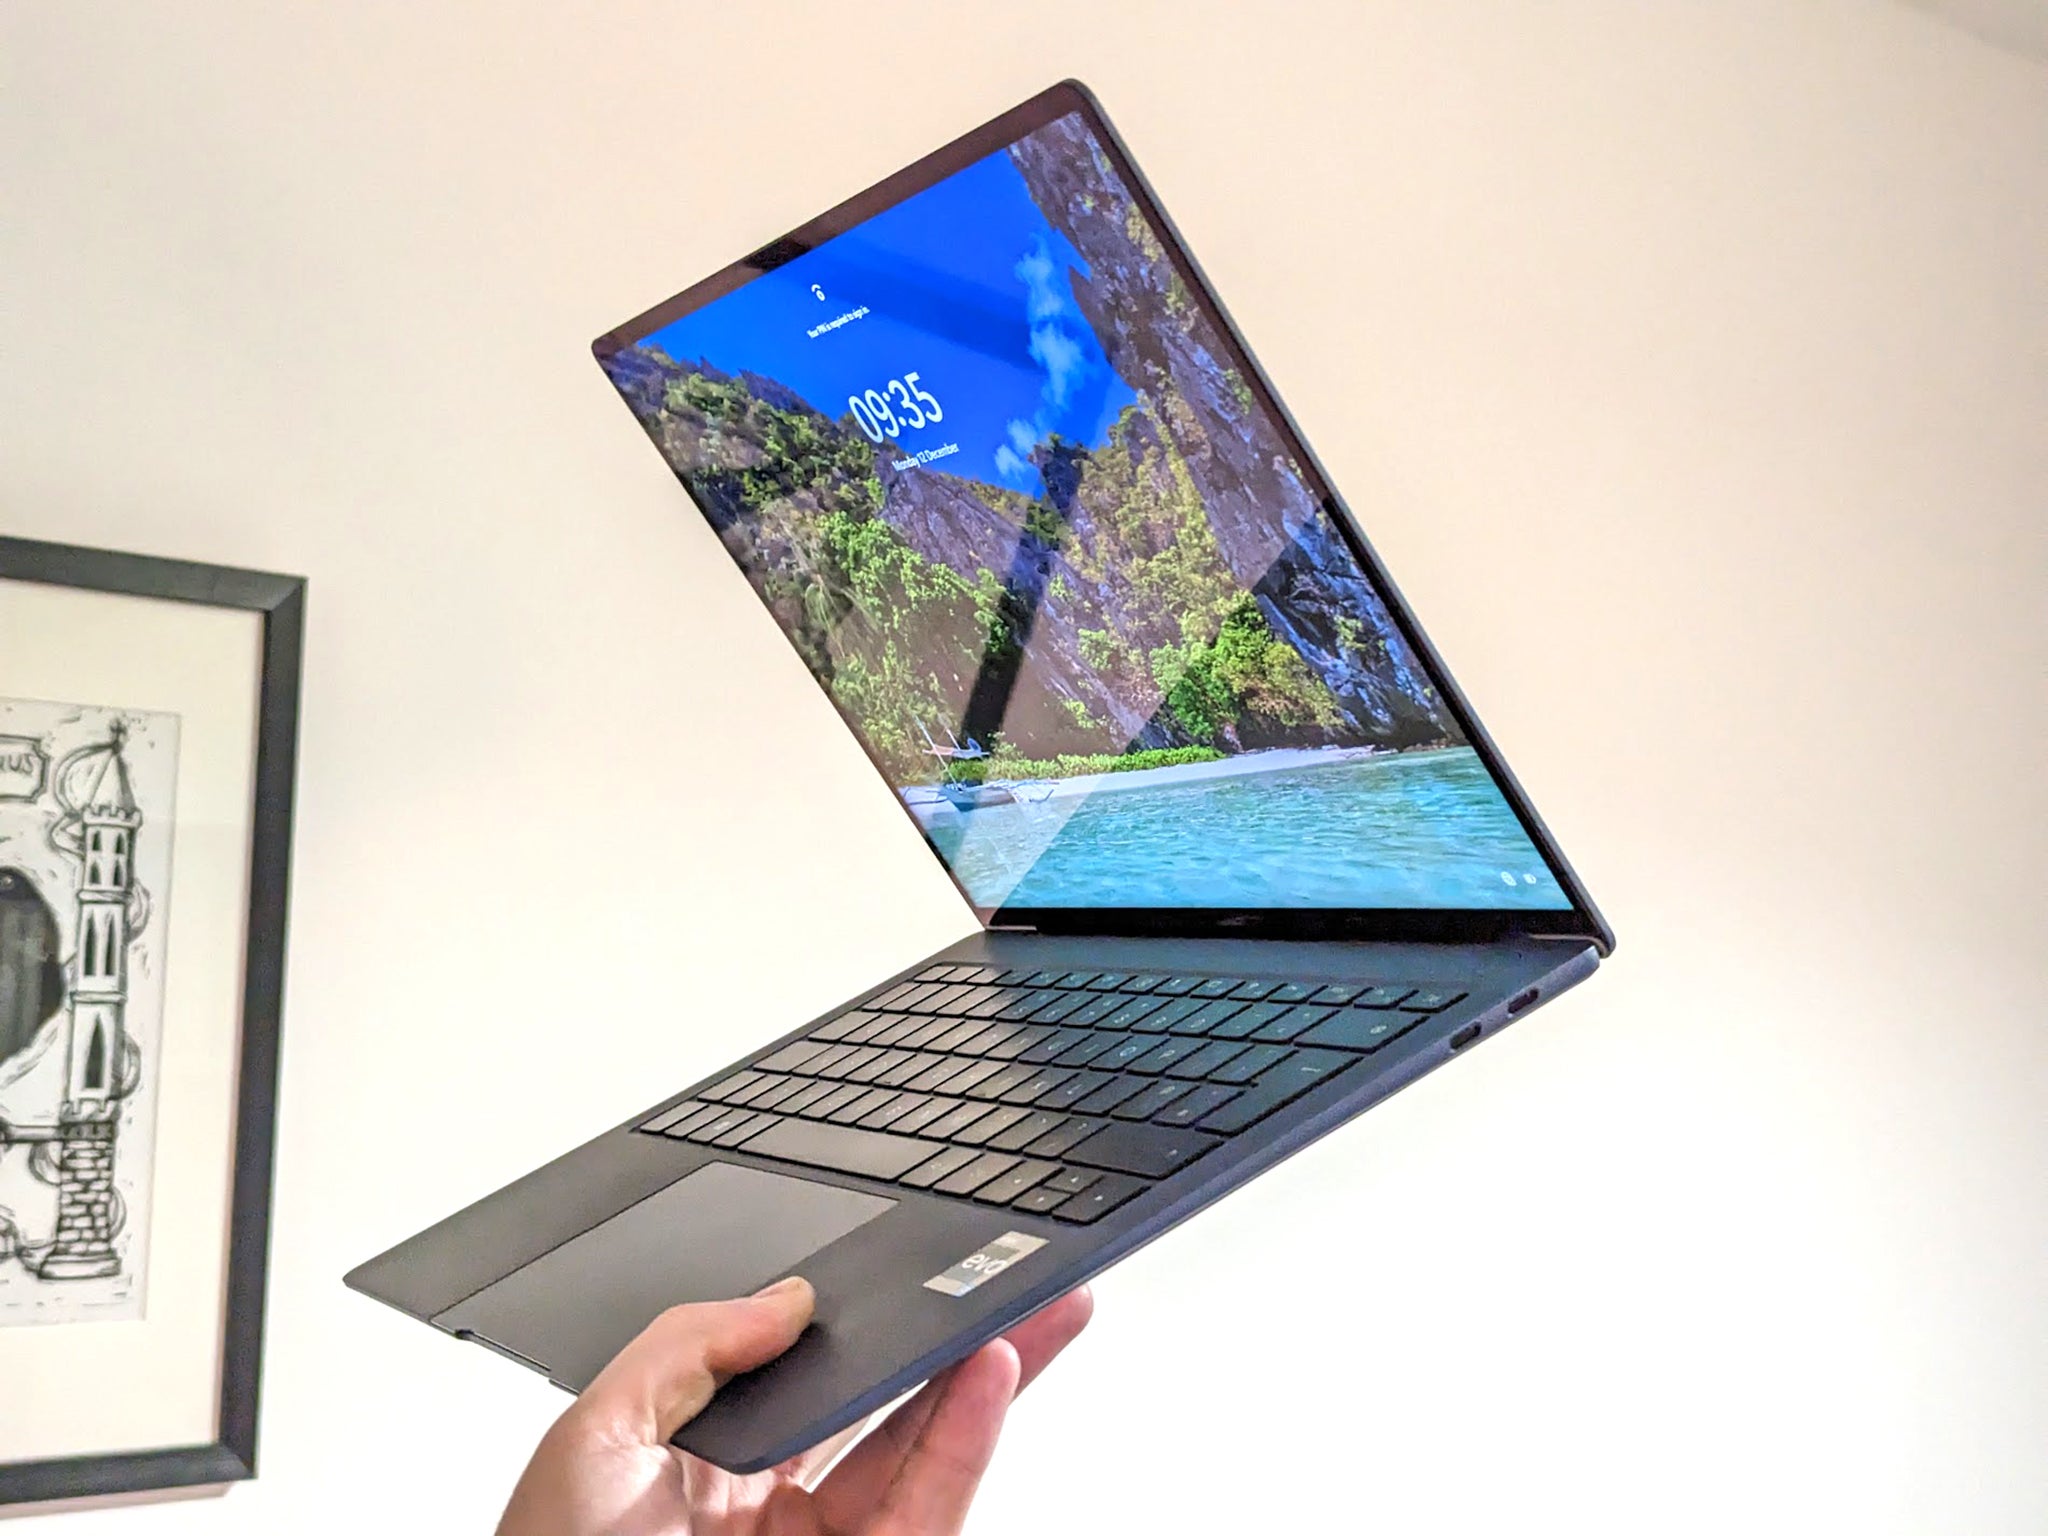 At 1.26kg, the MateBook X Pro is as portable as ultrathin’s get